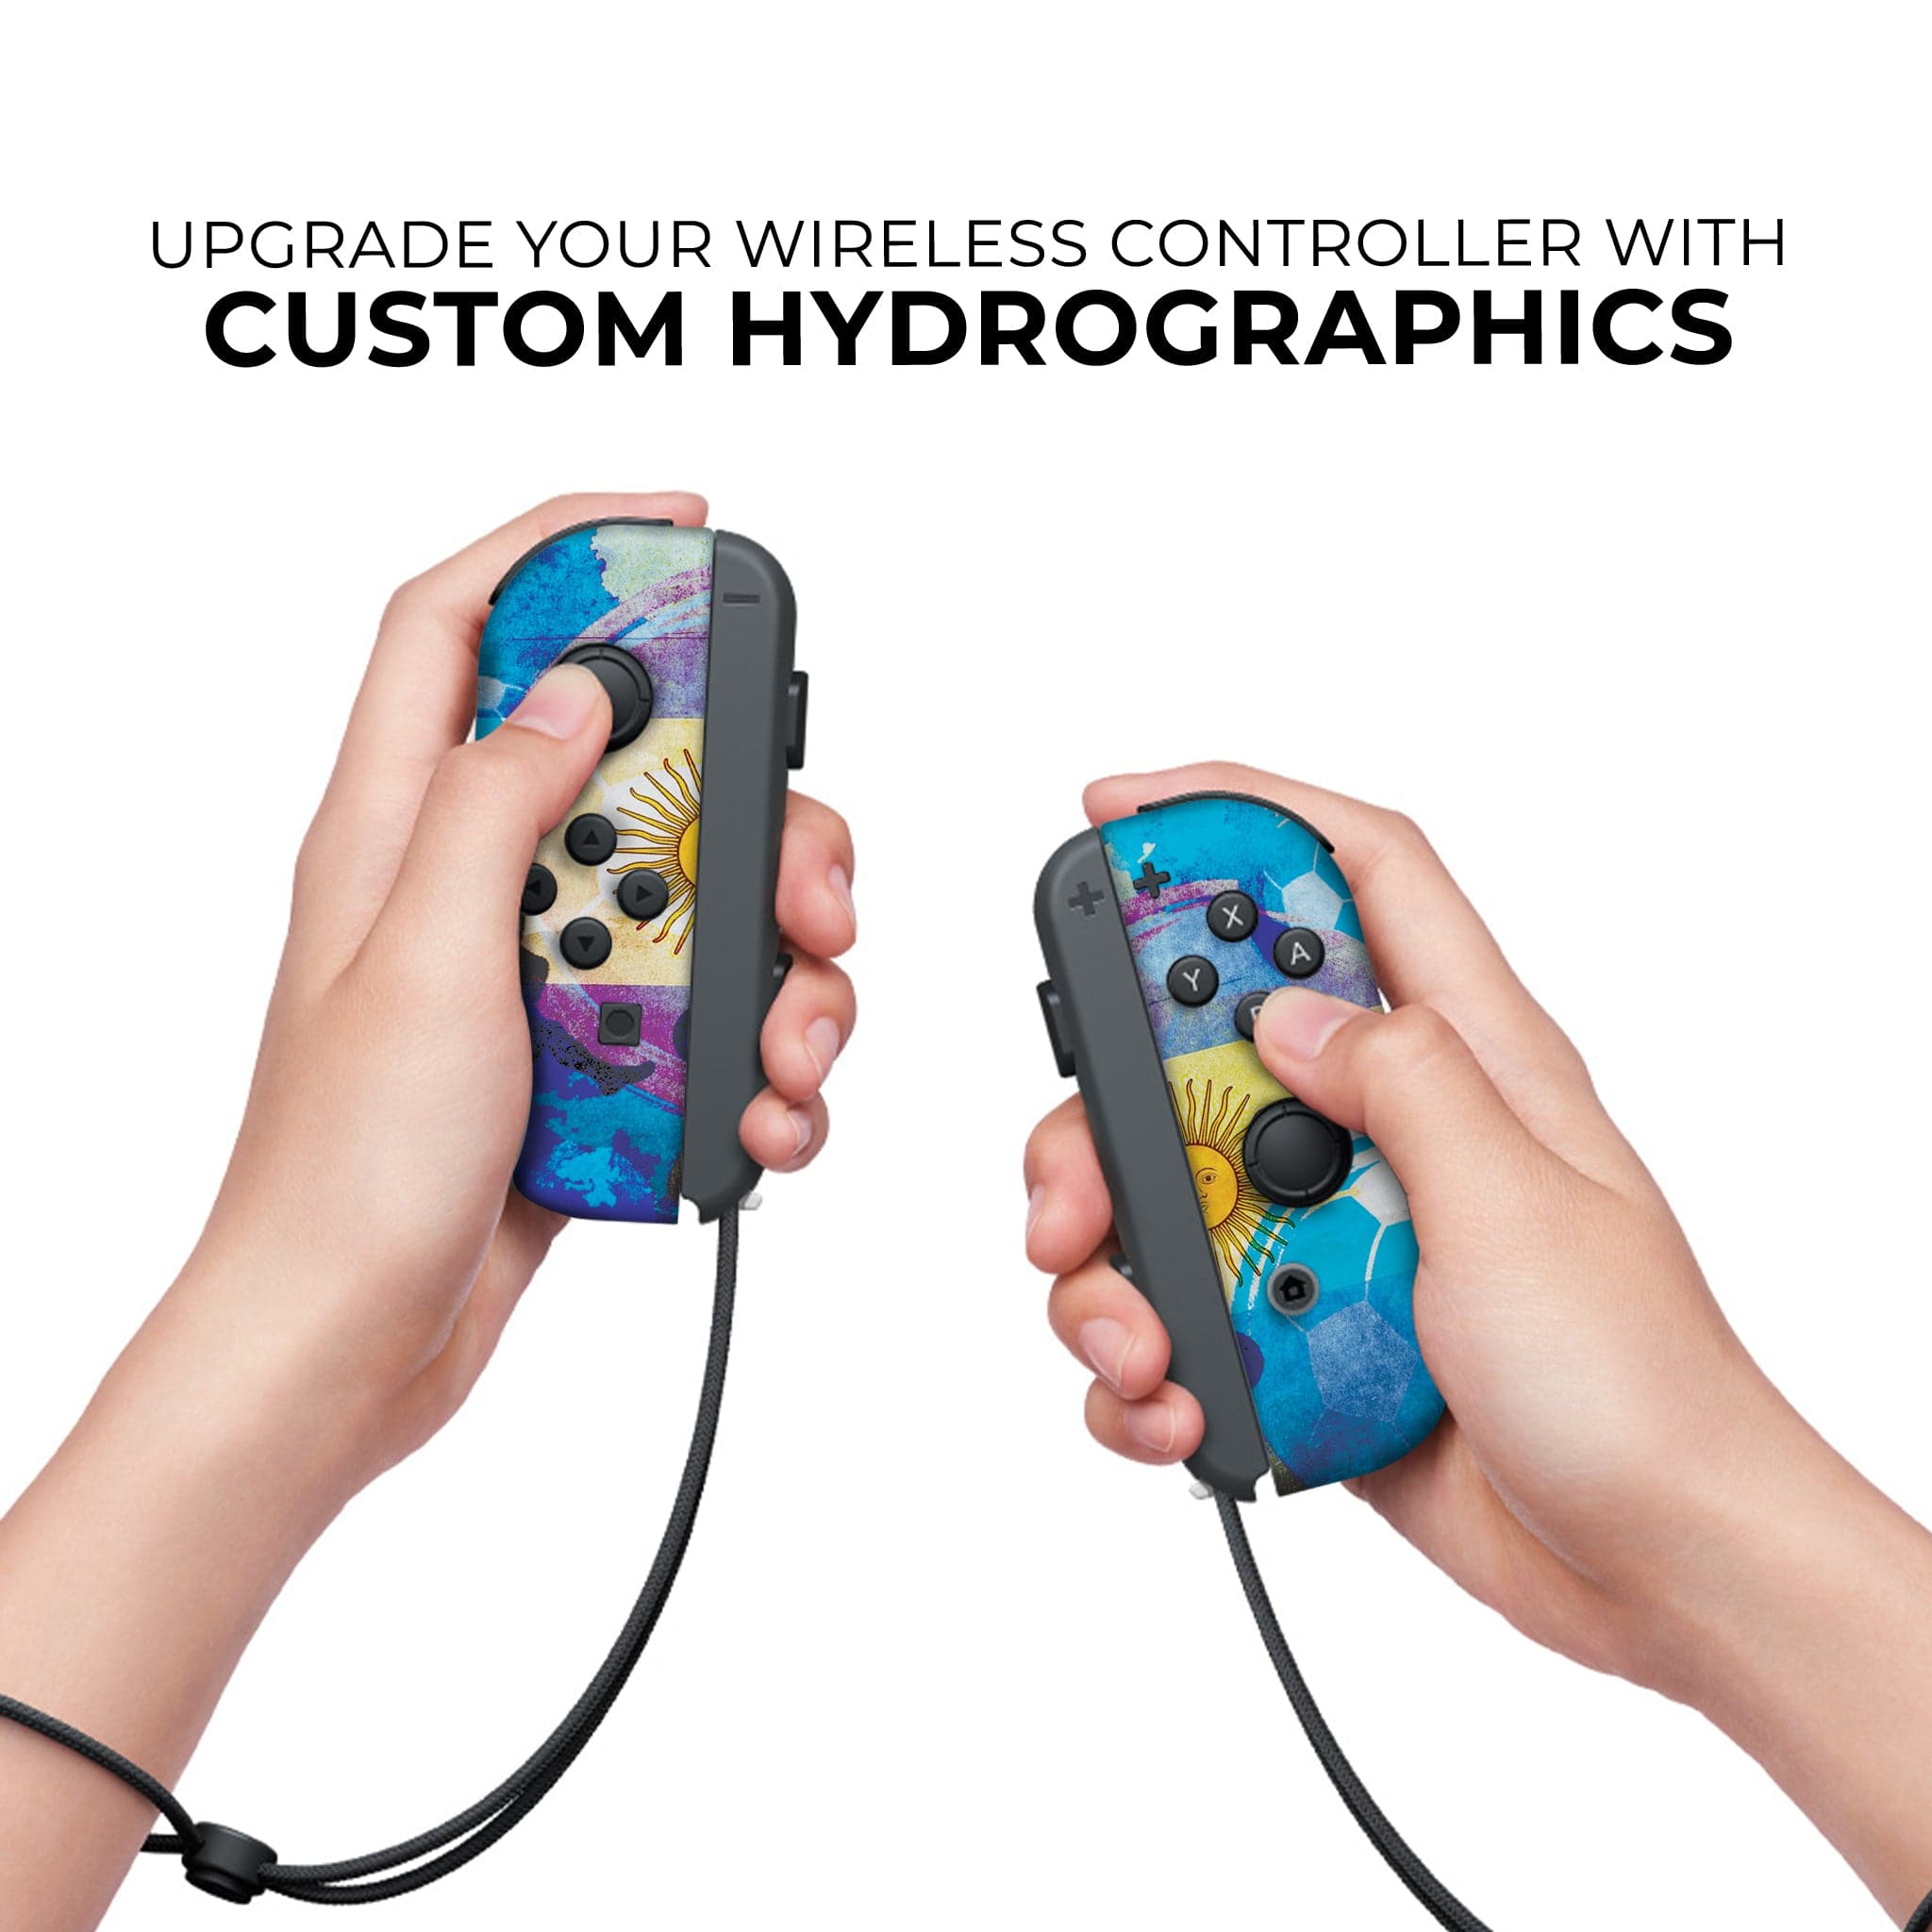 Argentina Inspired Nintendo Switch Joy-Con Left and Right Switch Controllers by Nintendo